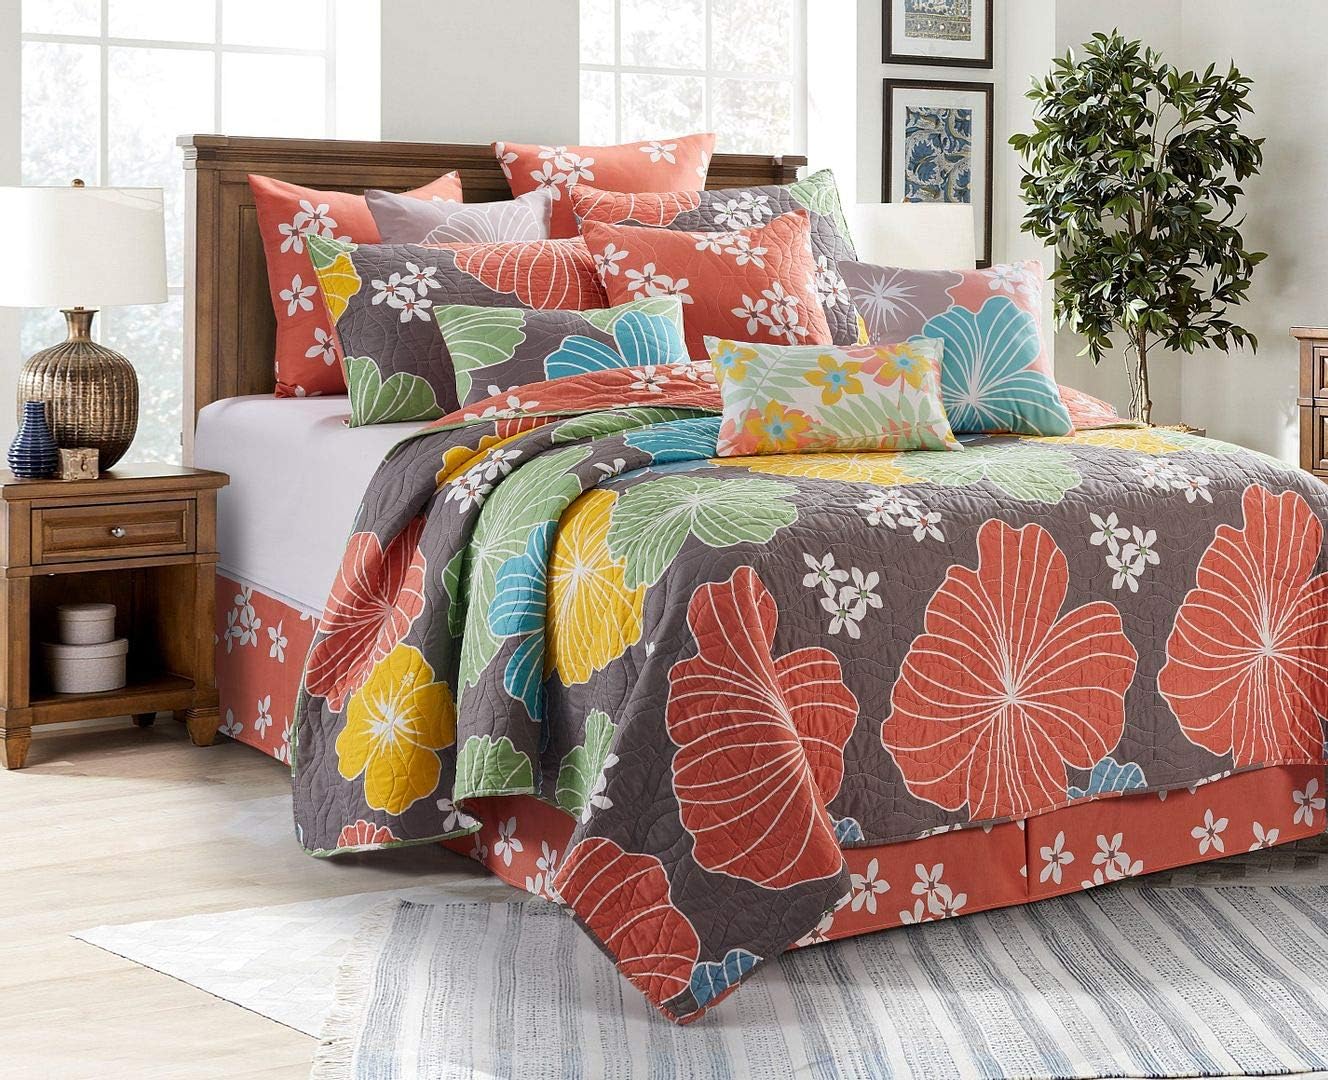 Virah Bella Quilt Bedding Set in Full/Queen Hibiscus Printed Lightweight Reversible Quilt with 2 Matching Pillow Shams - Cozy & Beautiful Contemporary-Themed Bedding